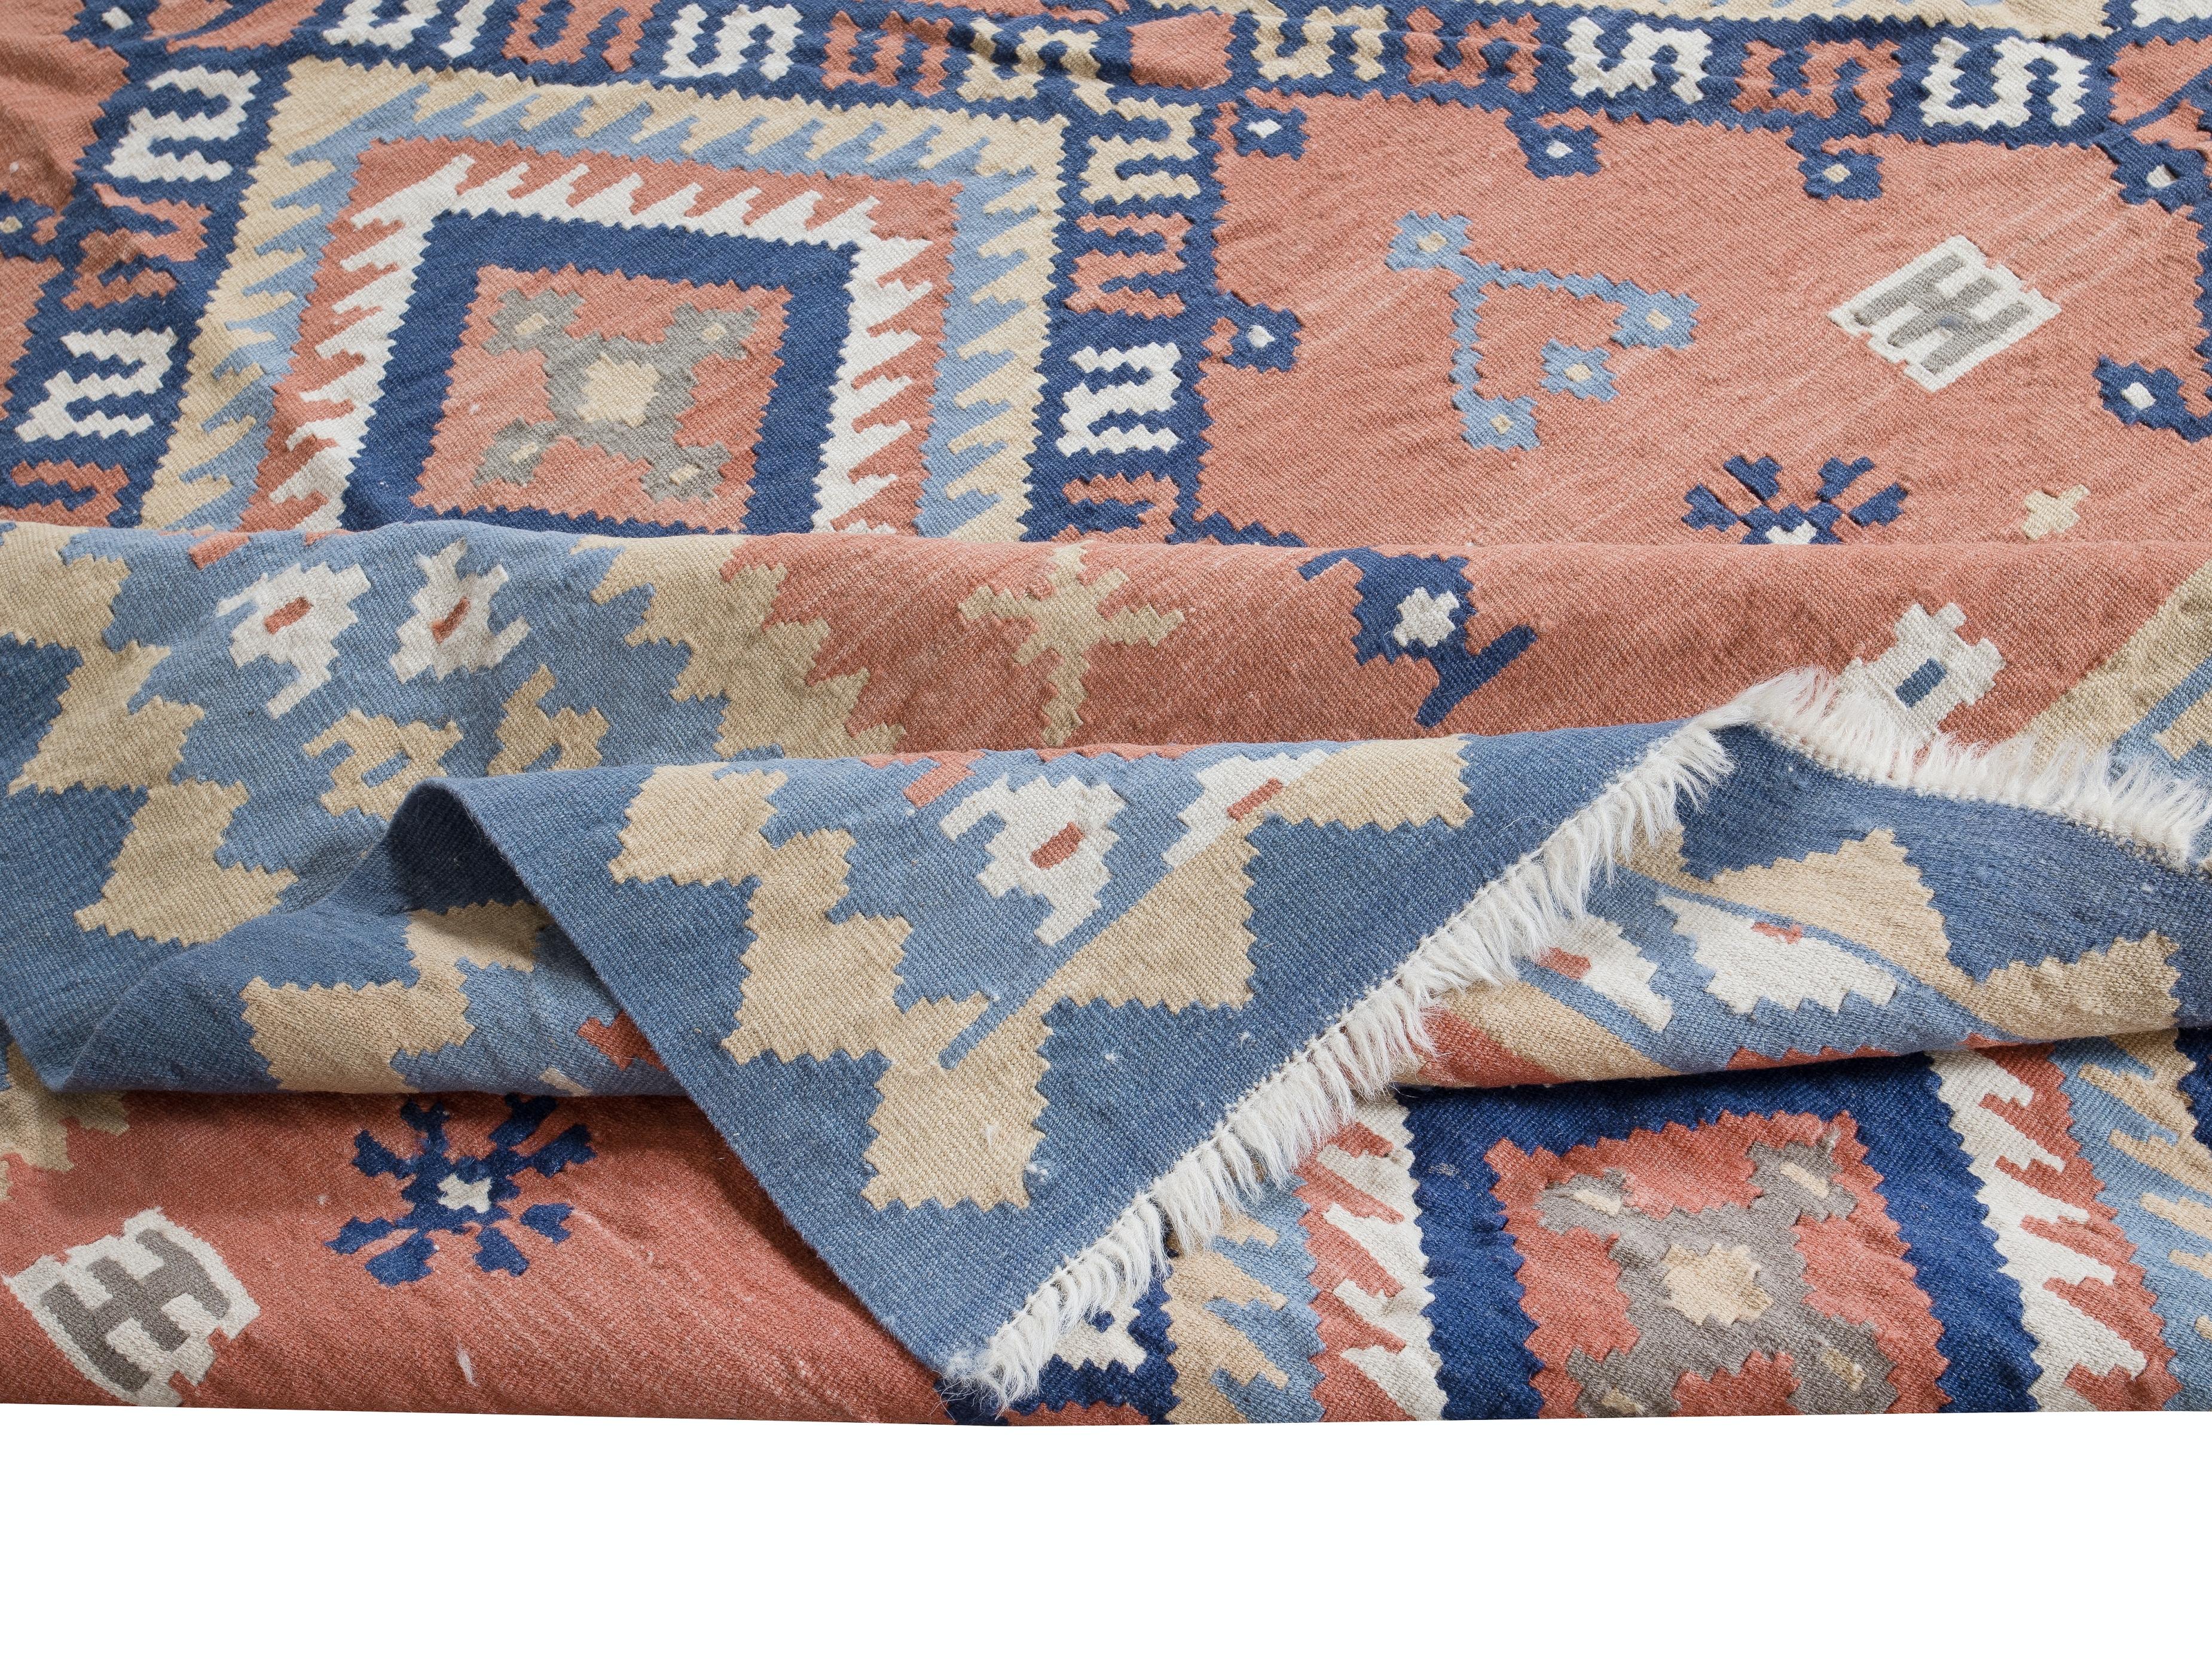 8.5x9.2 Ft Swedish Hand-Woven Vintage Wool Kilim Rug with Geometric Details In Good Condition For Sale In Philadelphia, PA